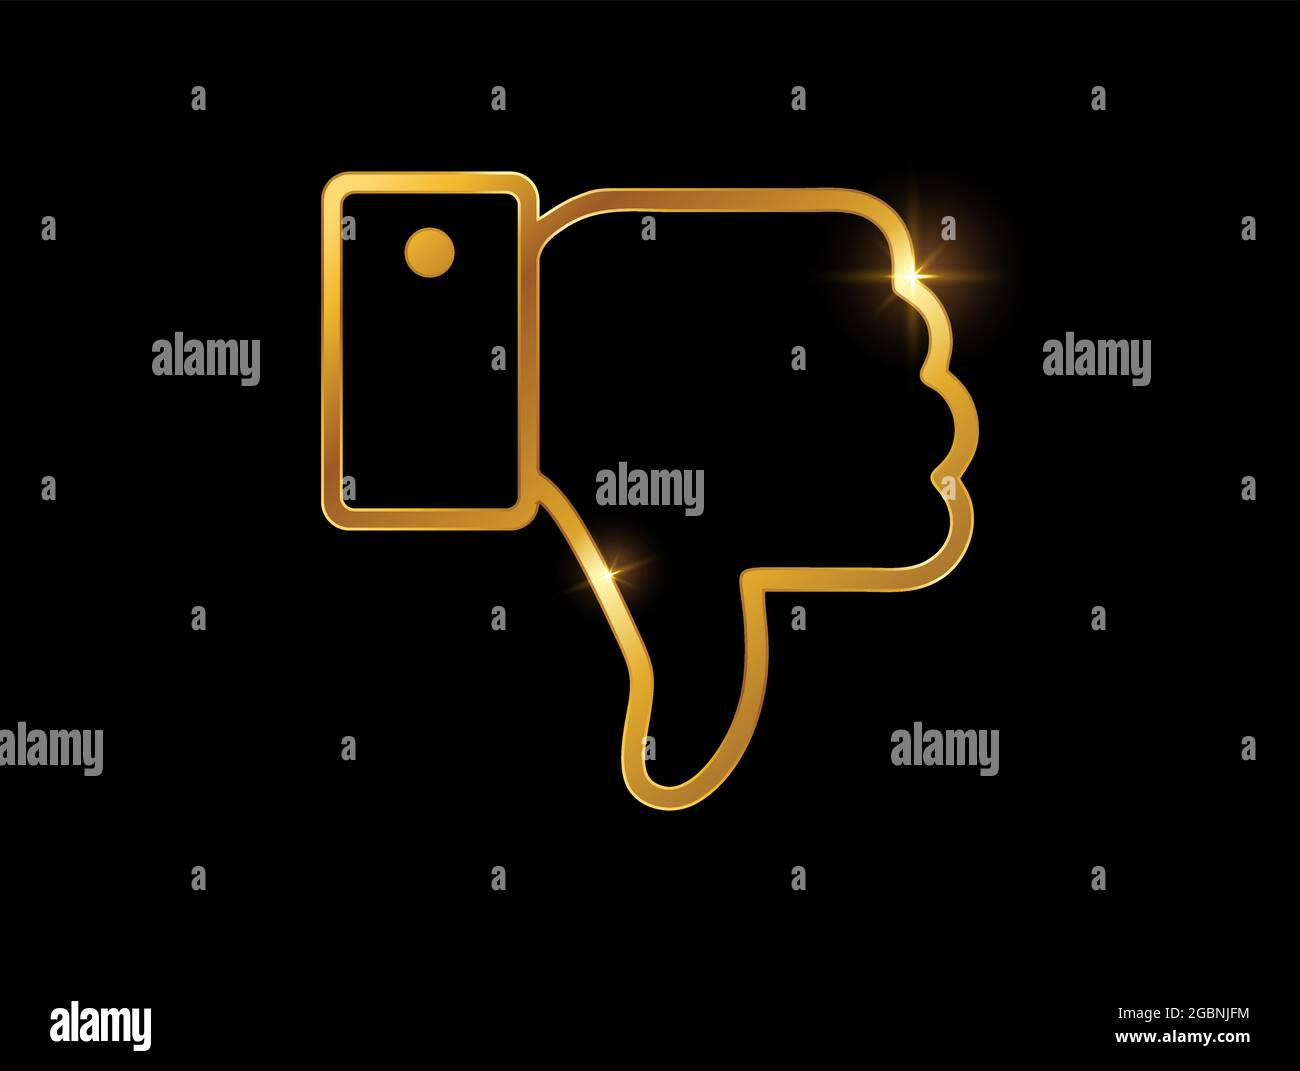 An Illustration of Golden Thumb Down Vector Sign in balck background with golden sign effect Stock Vector